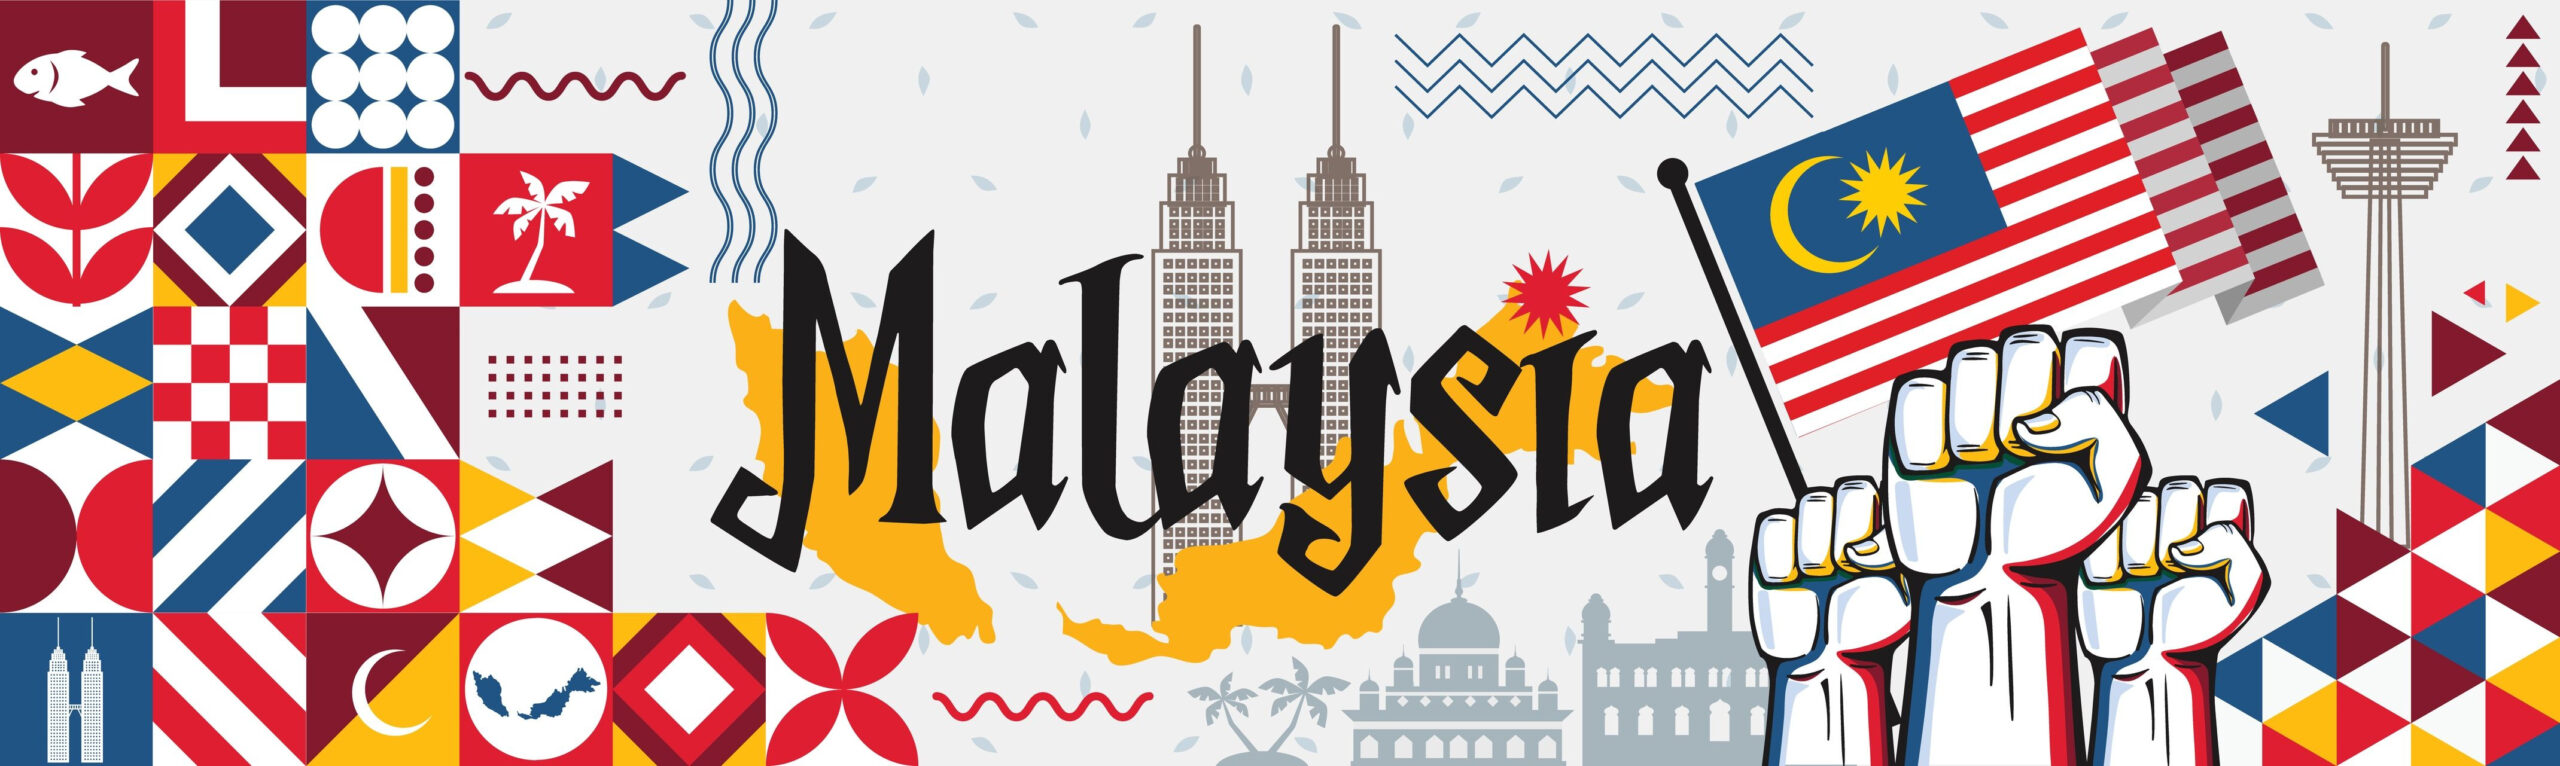 Malaysia National day or Hari Merdeka banner with retro abstract geometric shapes